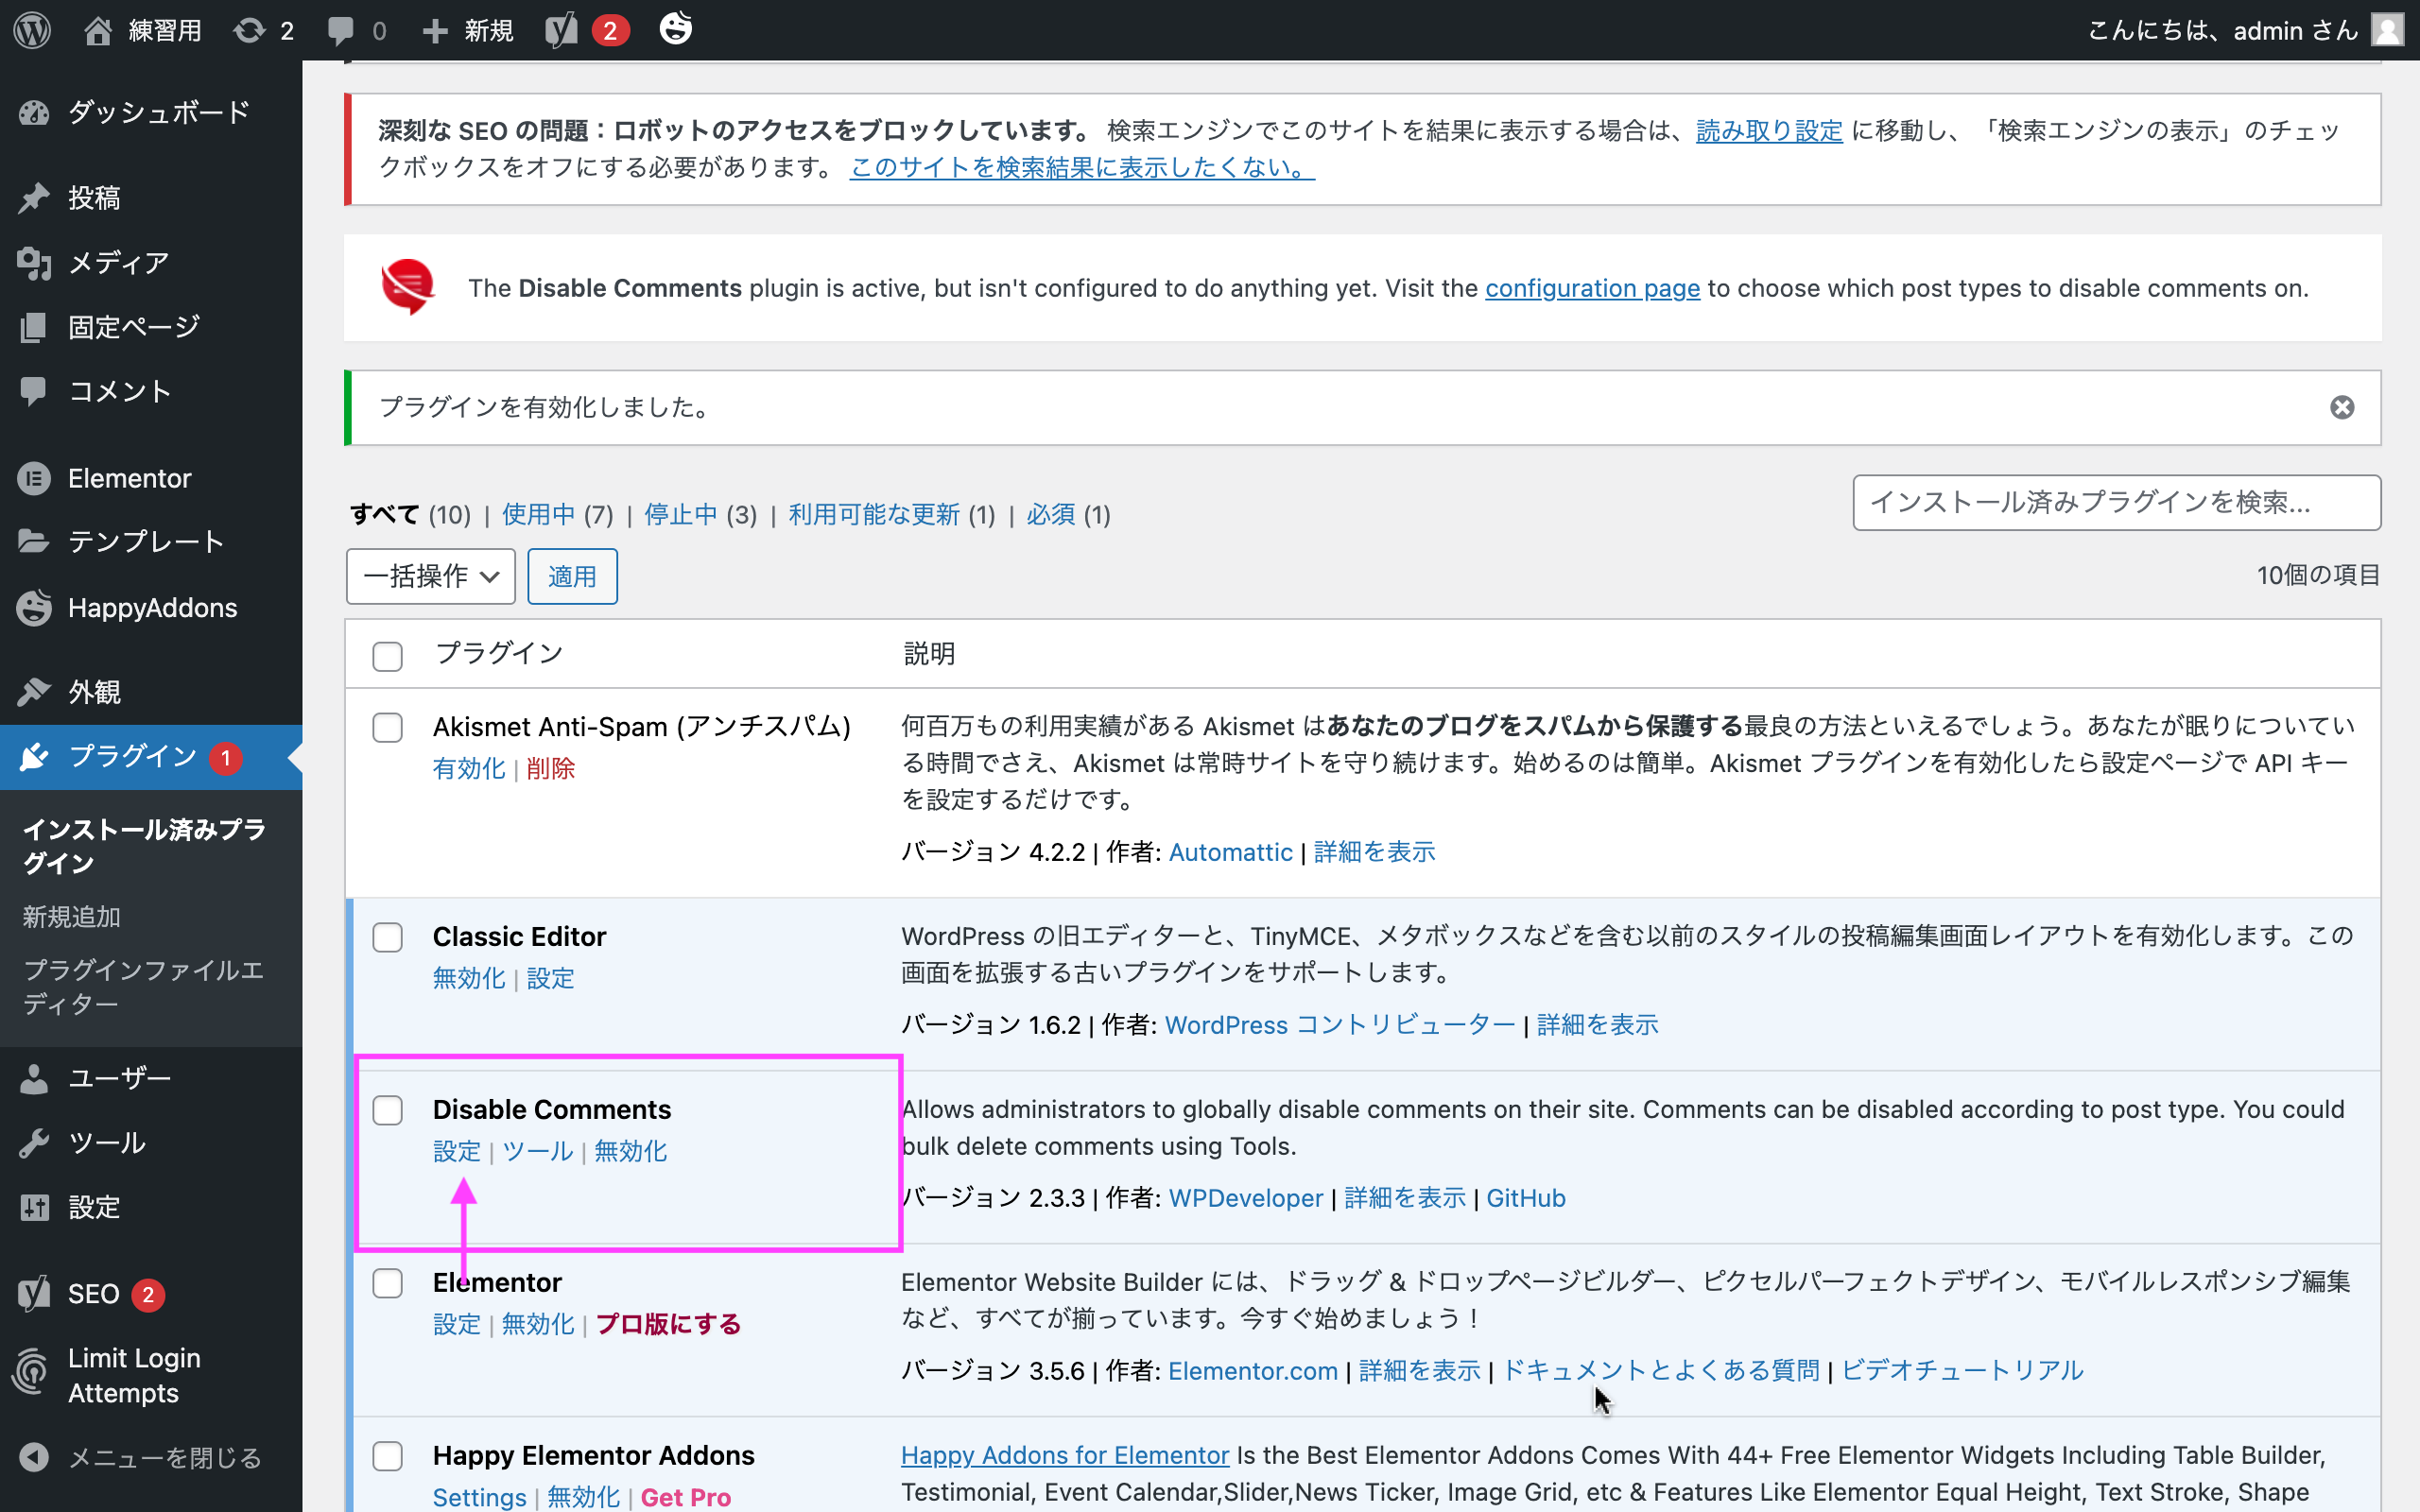 Disable Comments_セットアップ2